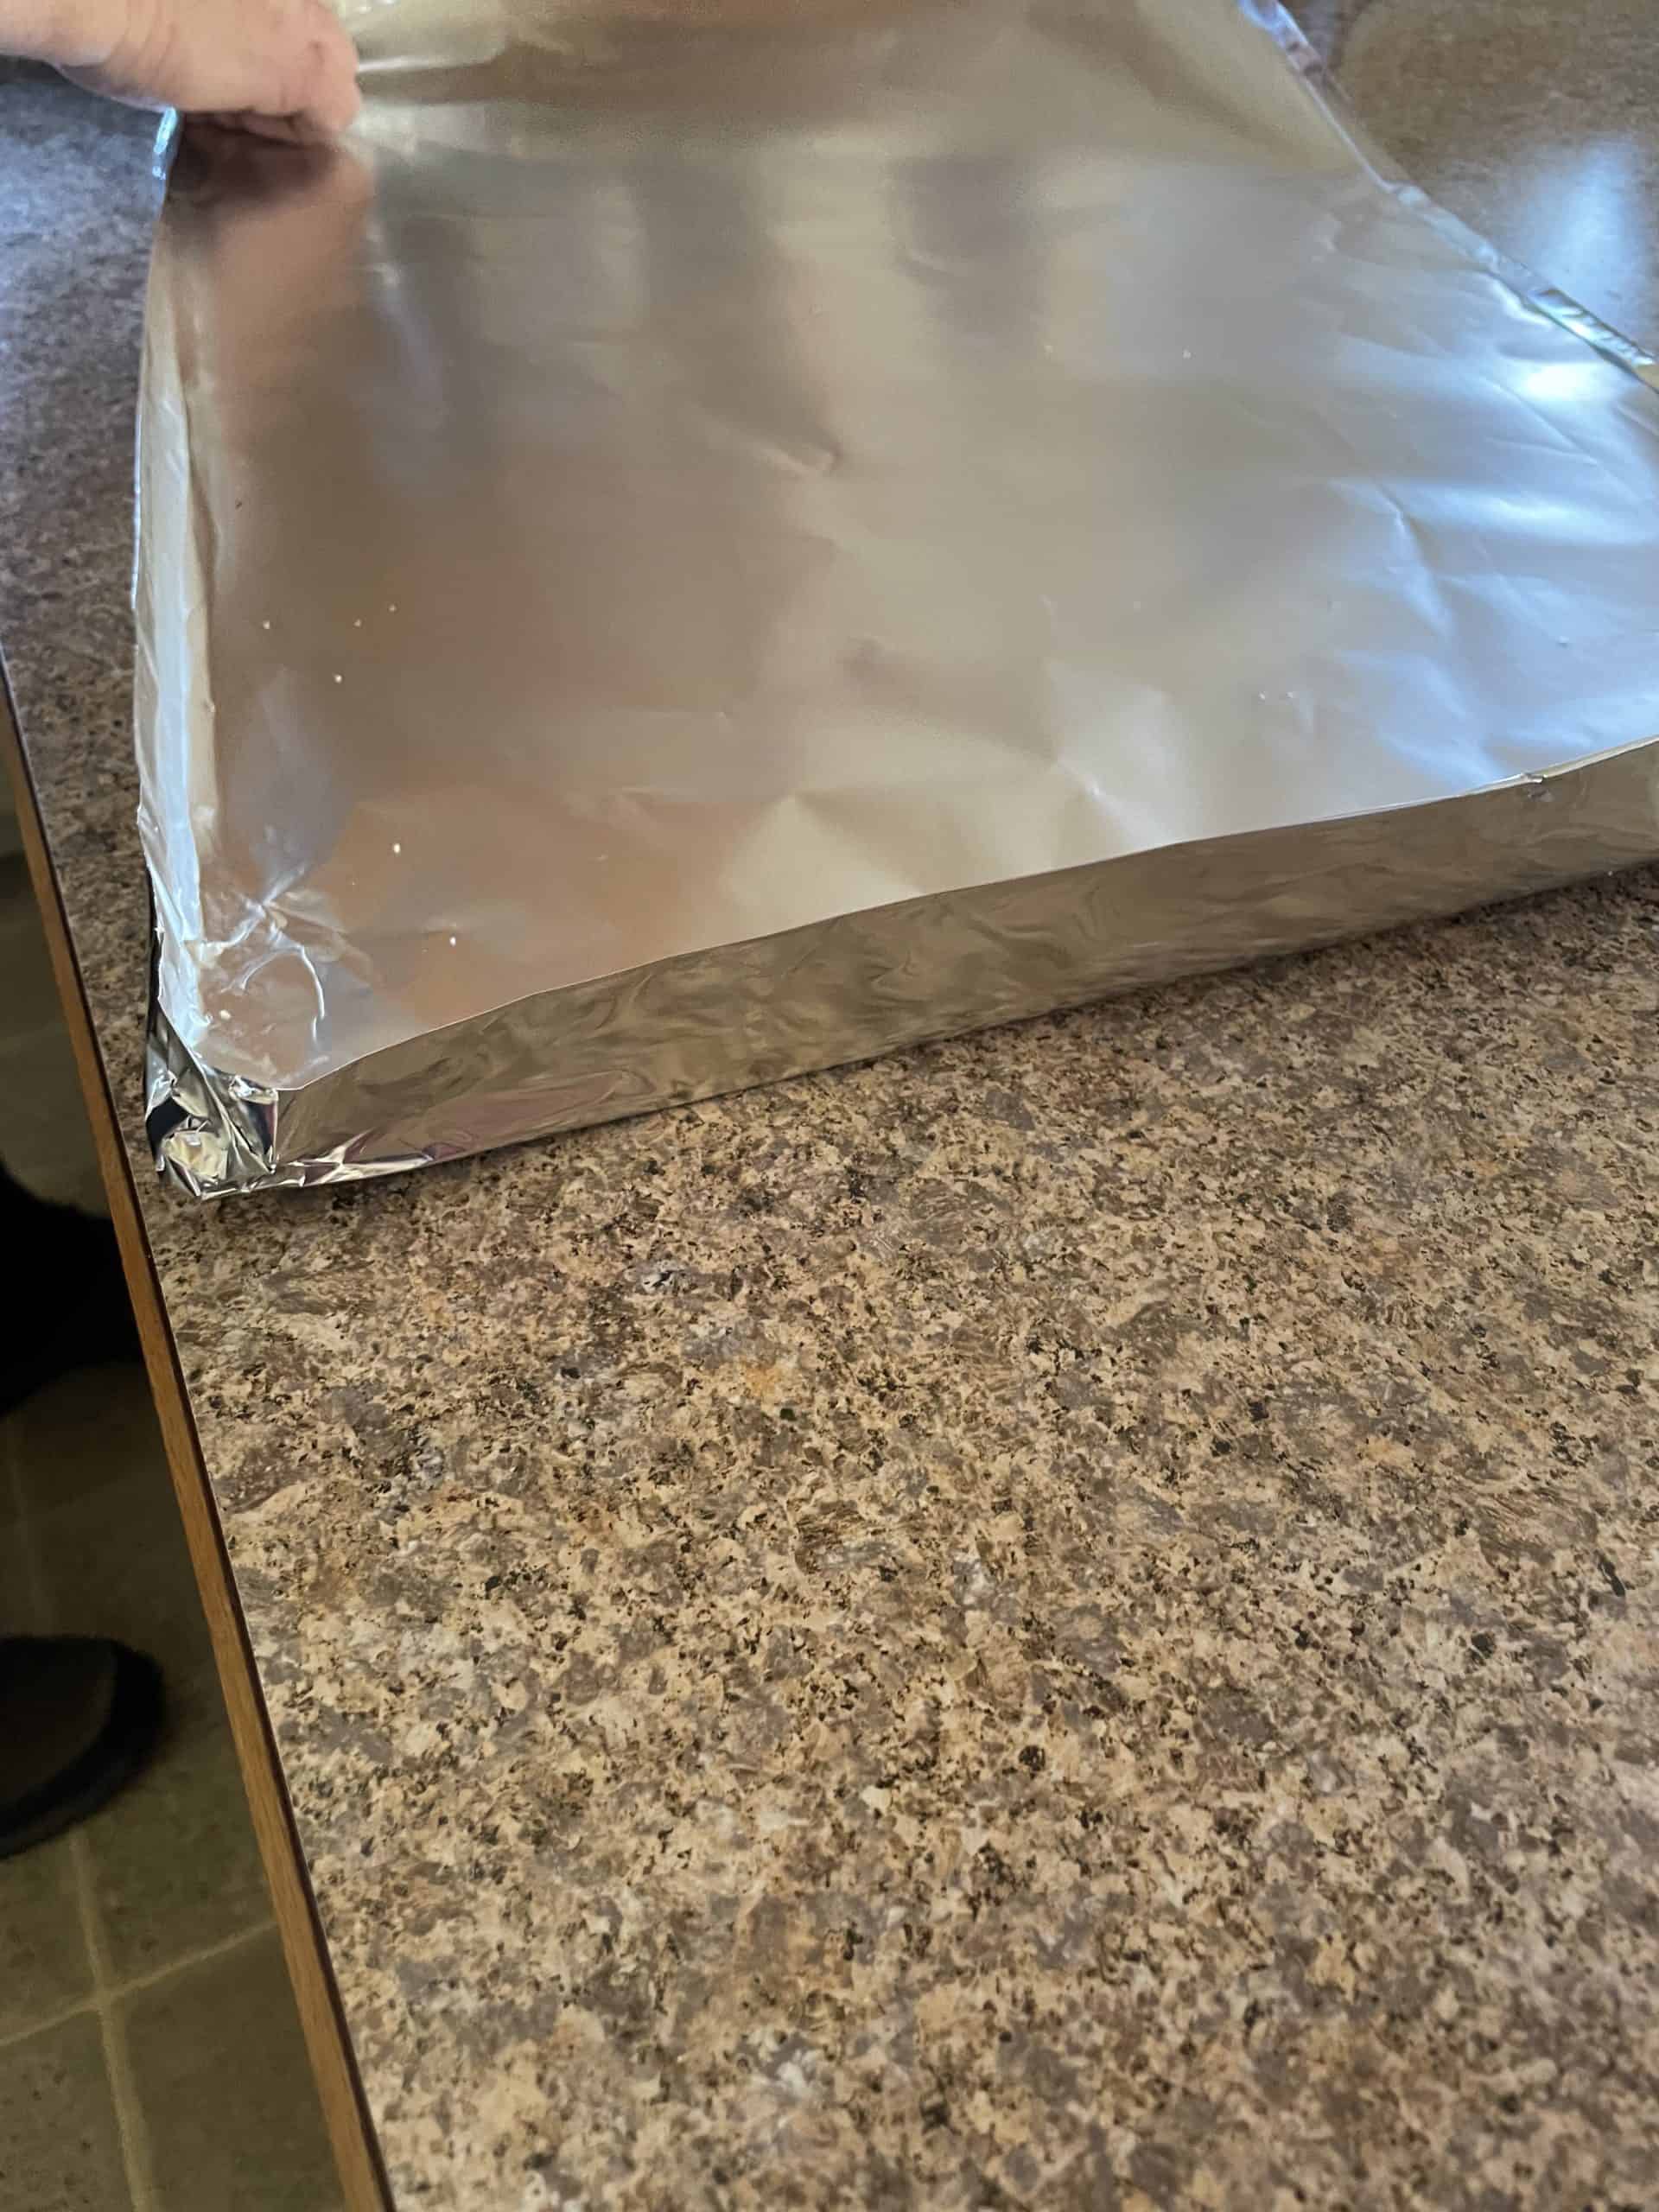 Crimp the corners together to form a foil tray.